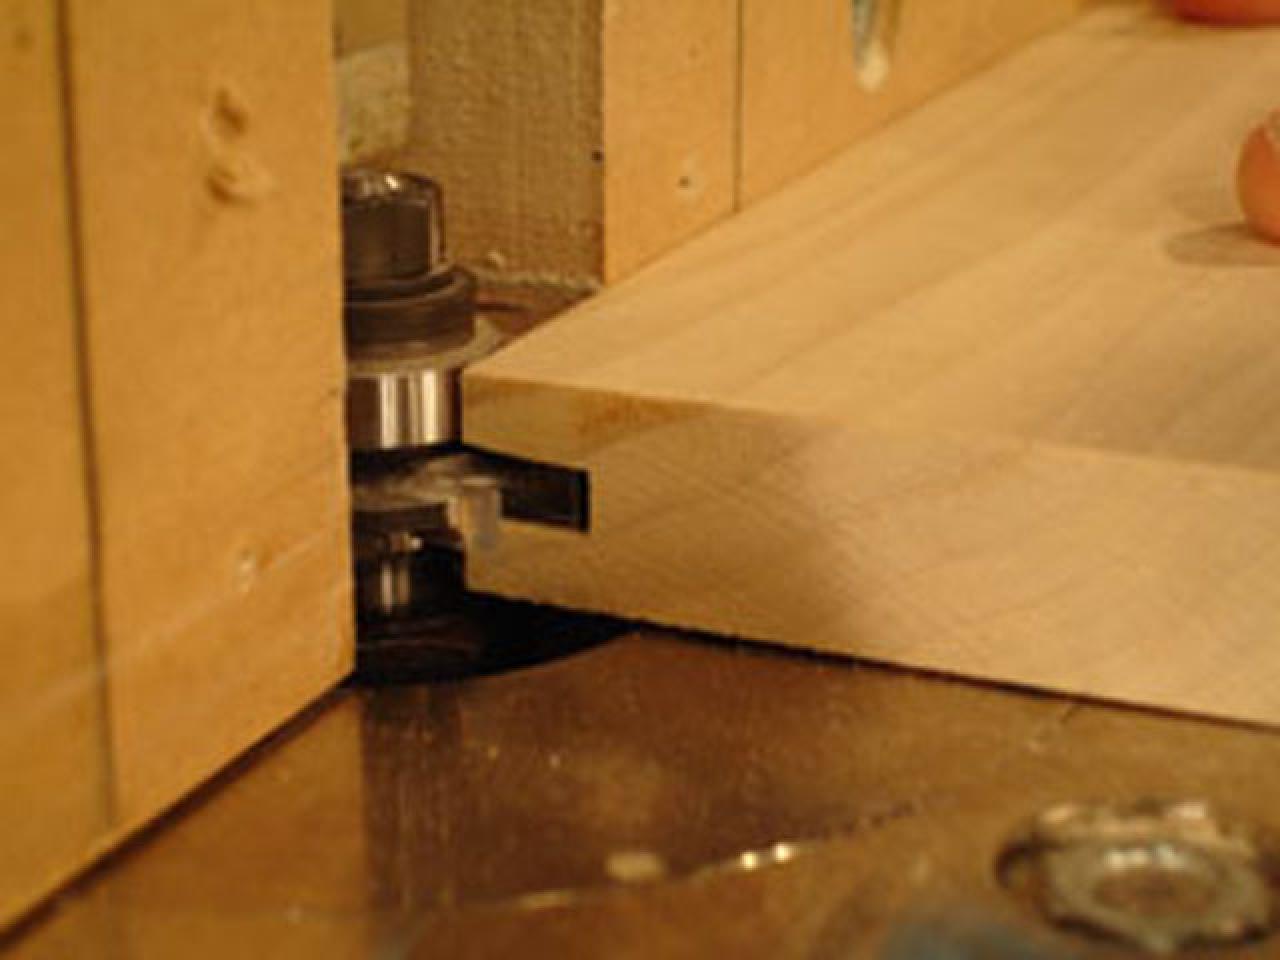 How to Cut Tongue-and-Groove Joints how-tos DIY